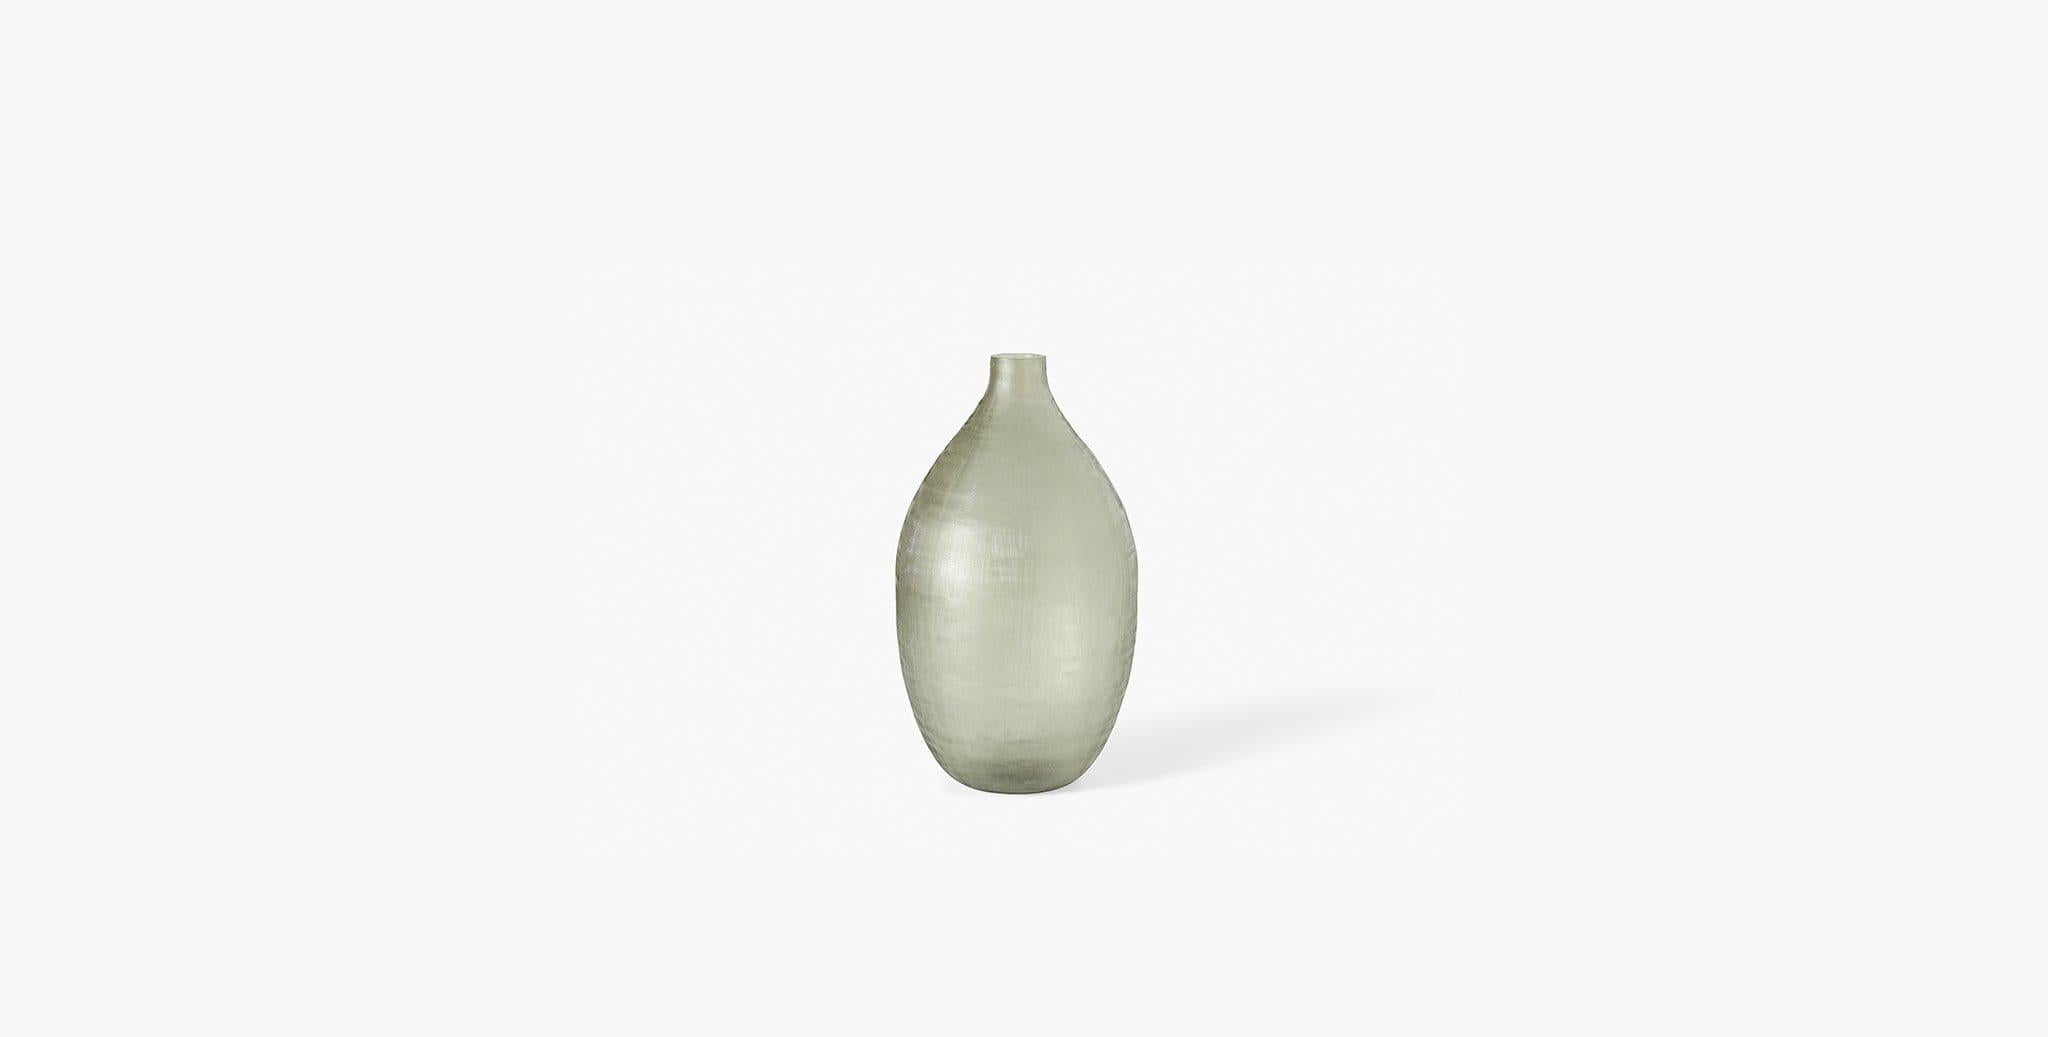 Our Rhea Vessel has a modern semi-opaque glass finish with a subtle crosshatch pattern that creates textural interest to your home design. Our handcrafted fabrics, leathers, and finishes are inspired by the natural variations within fibers,